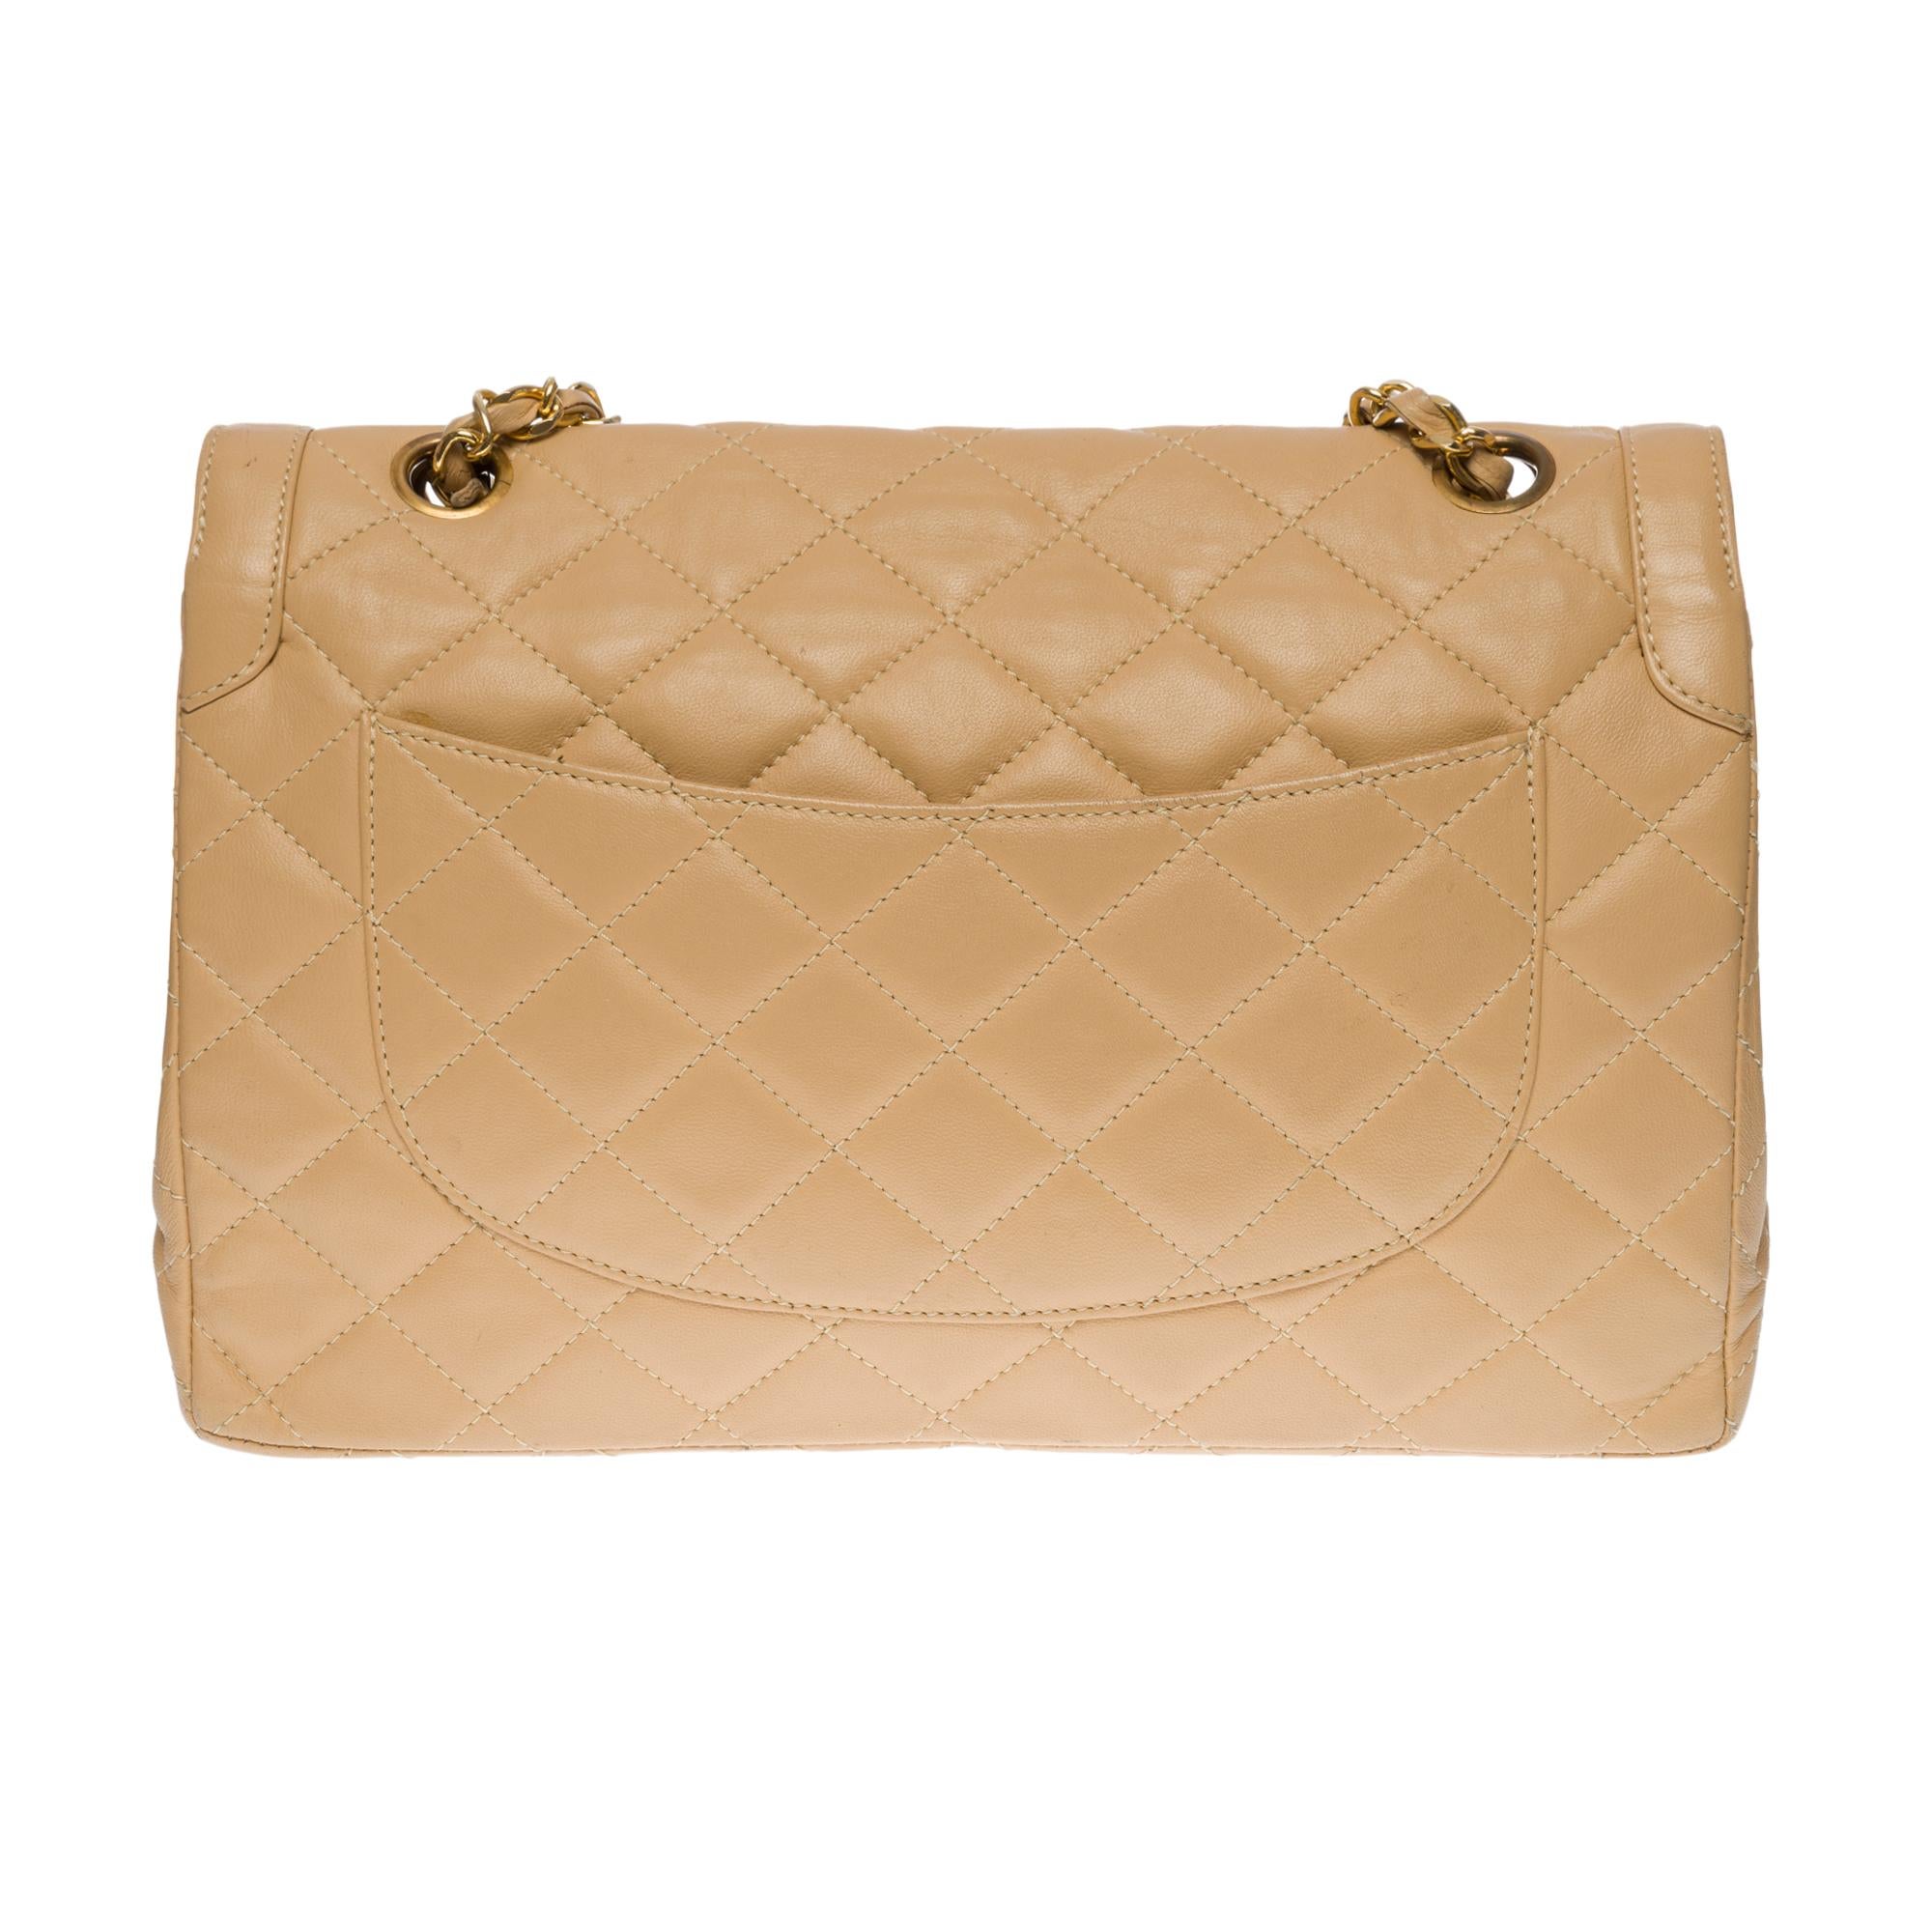 Very chic and Rare shoulder bag Chanel Classic Diana double flap shoulder bag in beige quilted lambskin leather,  gold-tone metal hardware, gold-tone metal chain handle interwoven with black leather for a hand and shoulder carry
Two-tone metal logo